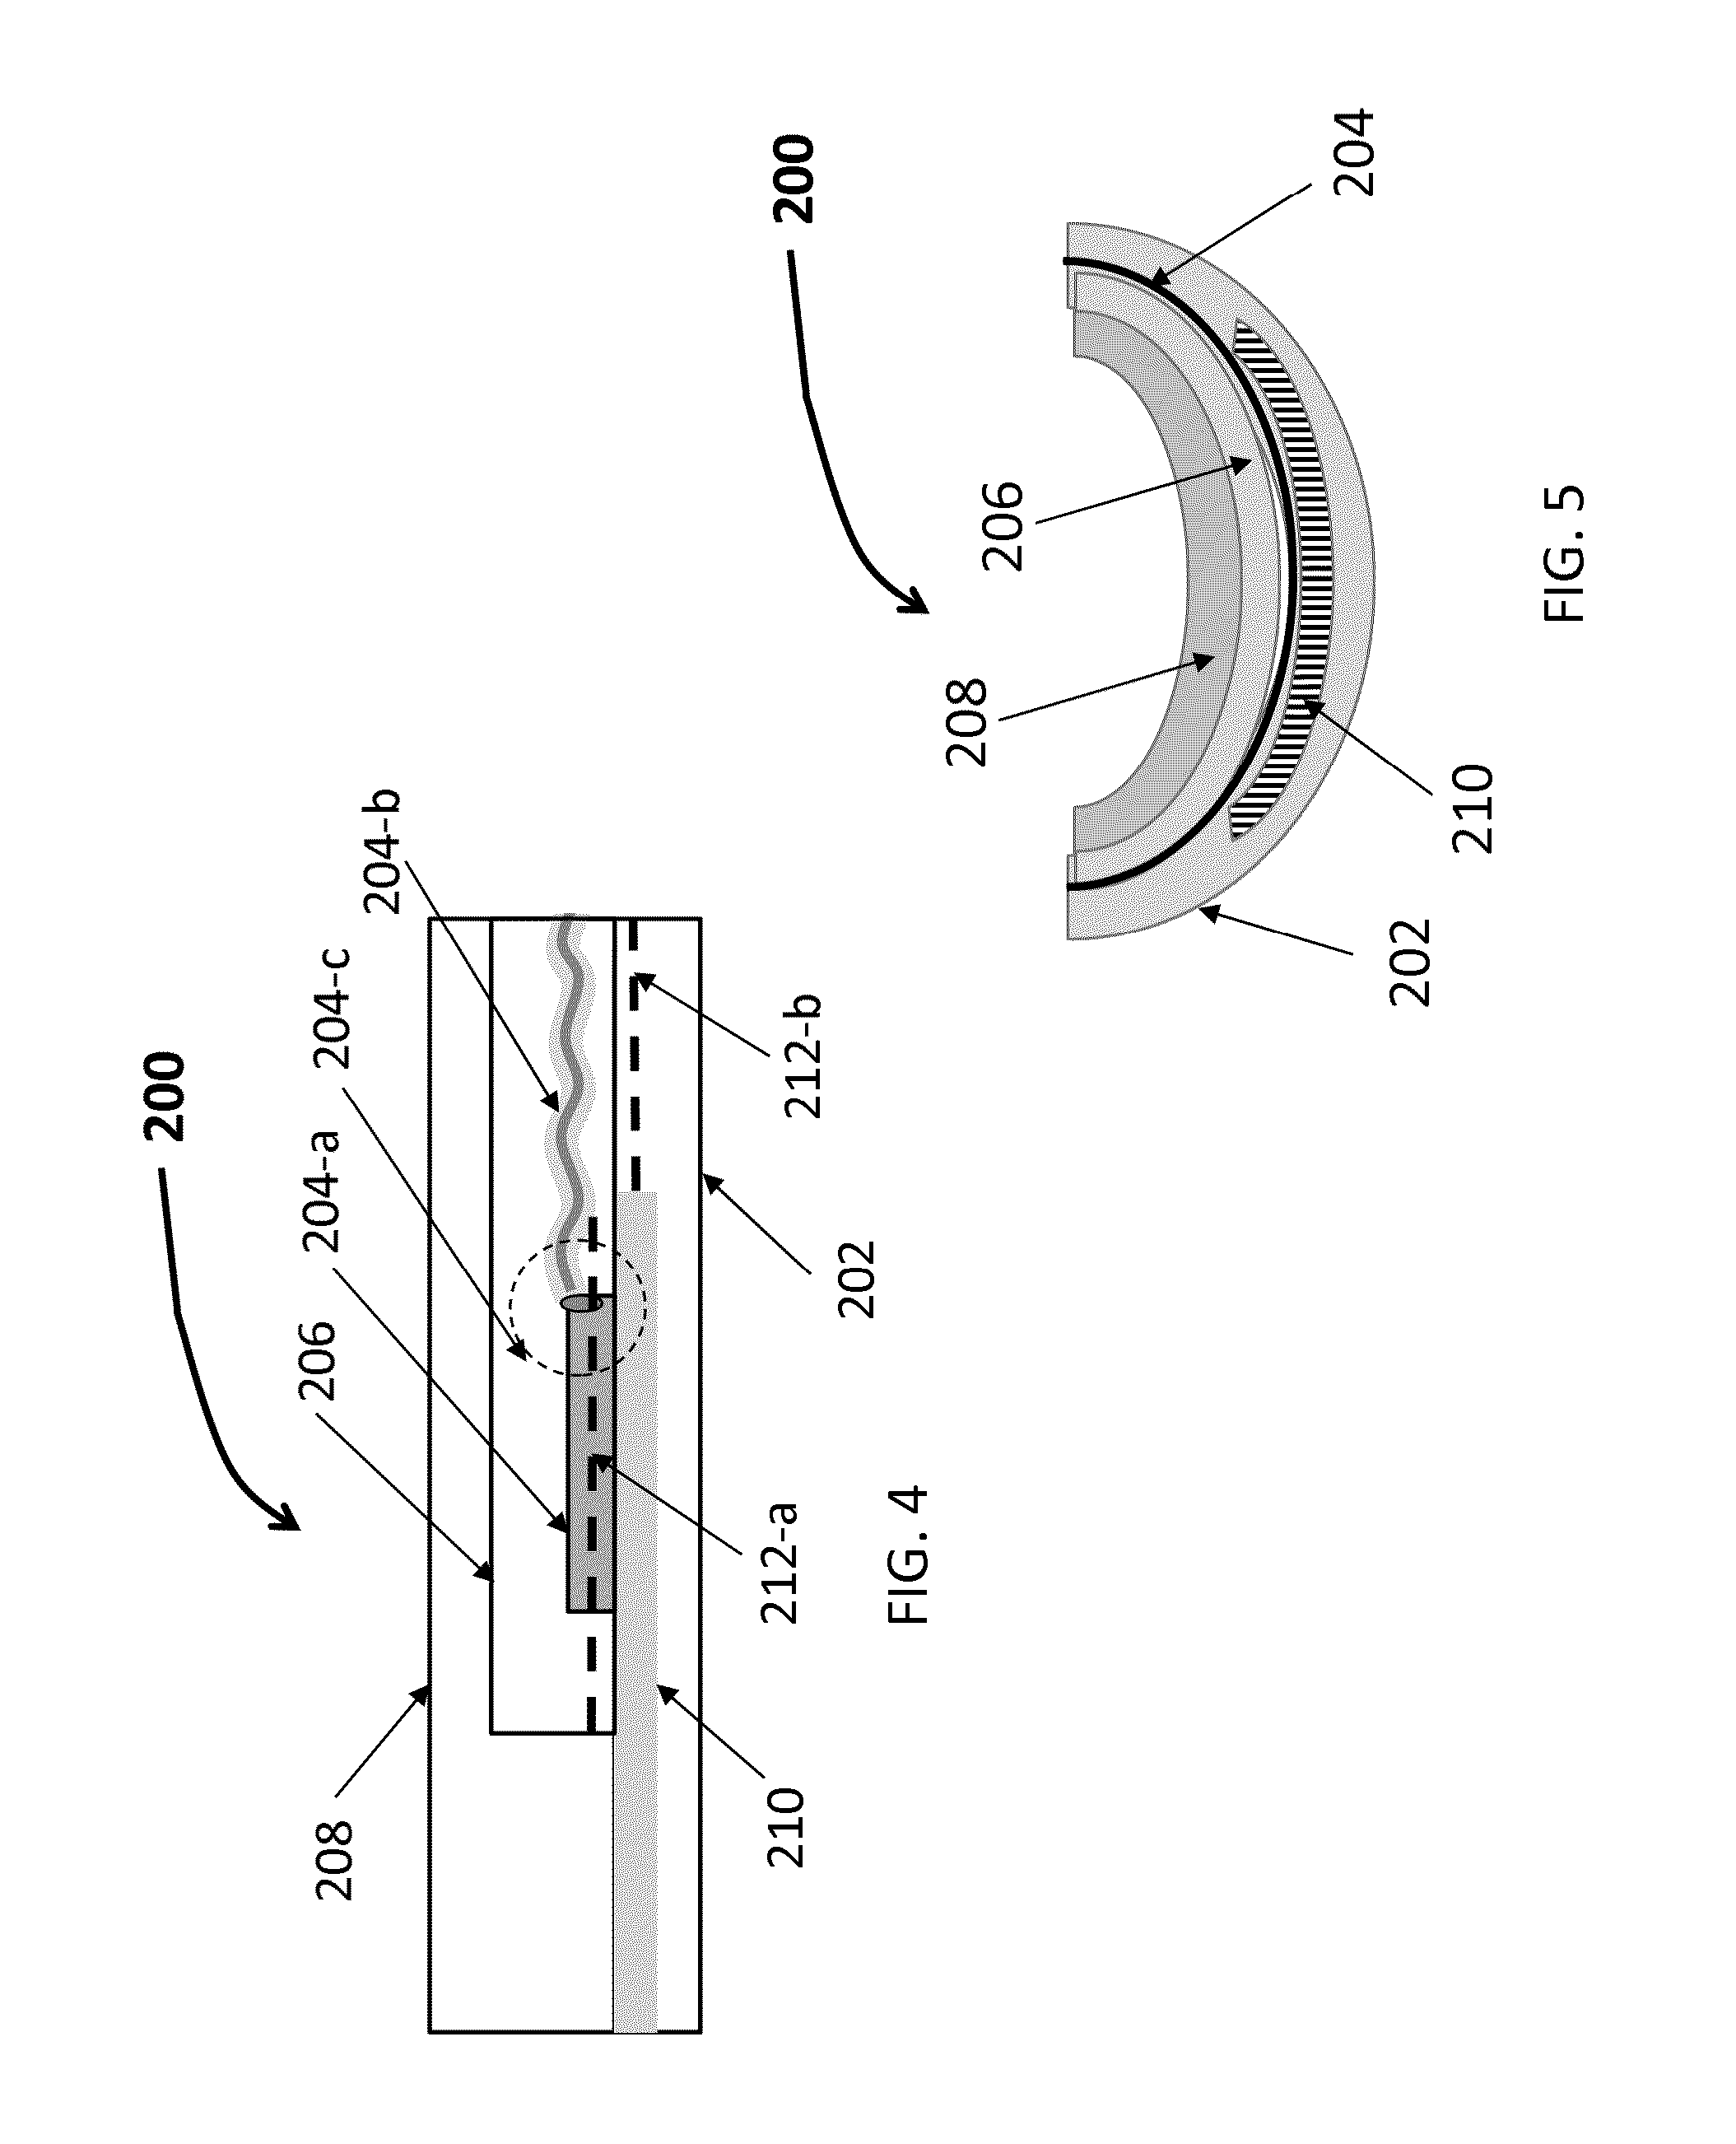 Band with conformable electronics